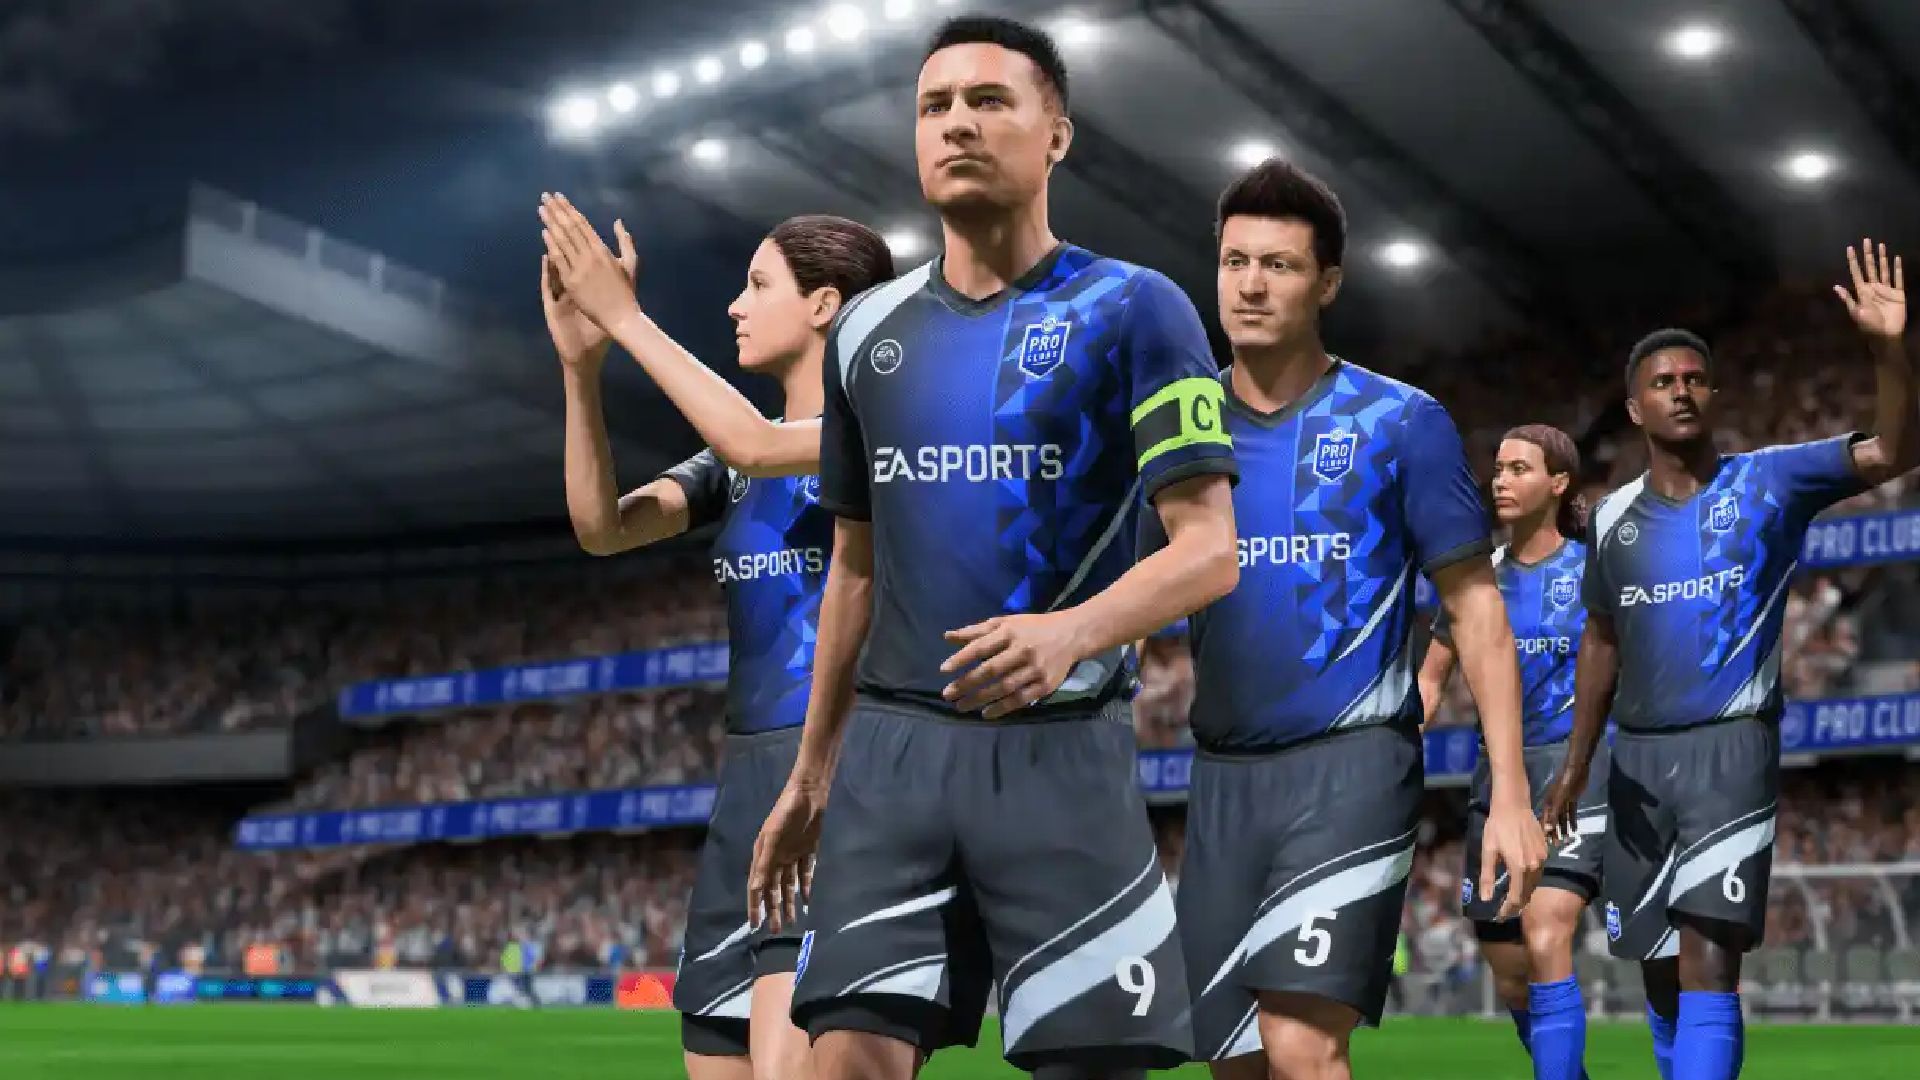 FIFA 23 will be available to EA Play and Xbox Game Pass